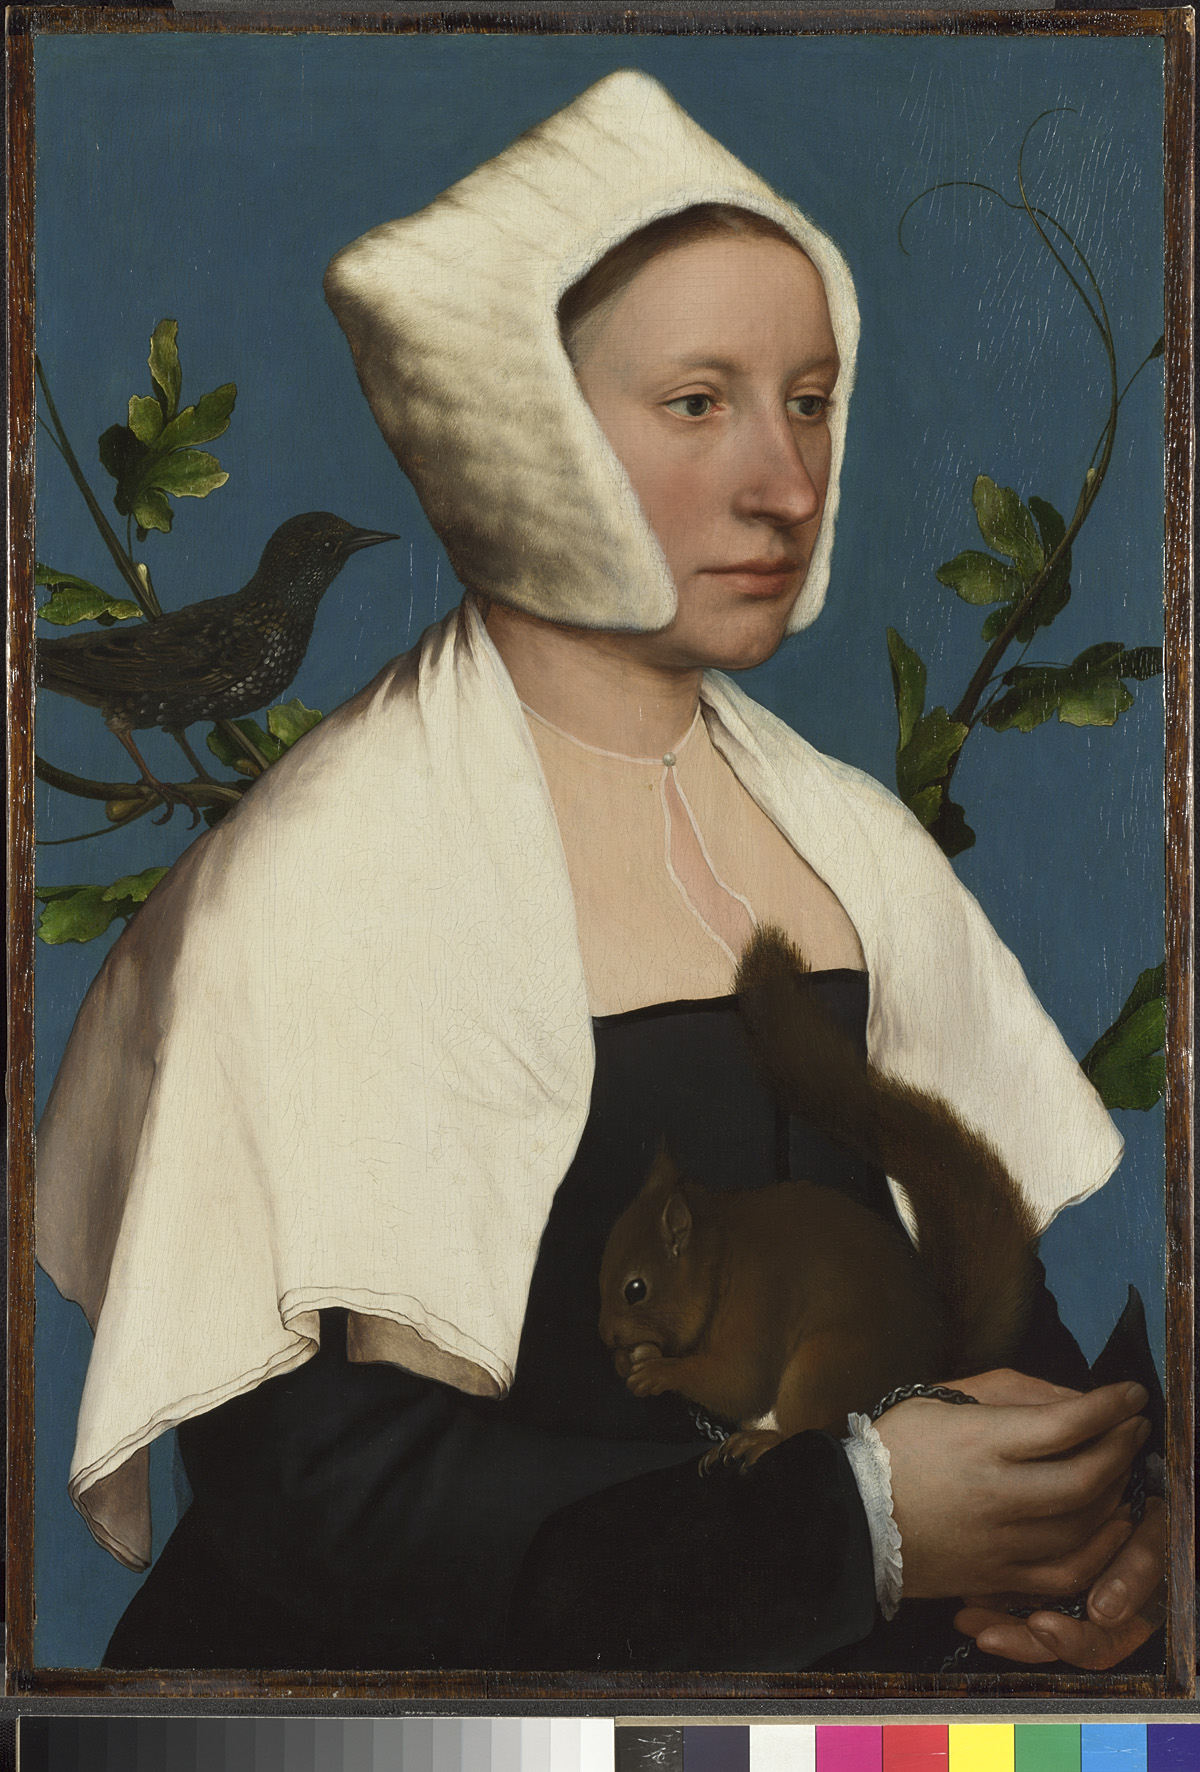 Hans Holbein the Younger (1497/8   1543)
A Lady with a Squirrel and a Starling (Anne Lovell?), about 1526 8
Oil on oak
The National Gallery, London
© The National Gallery, London
